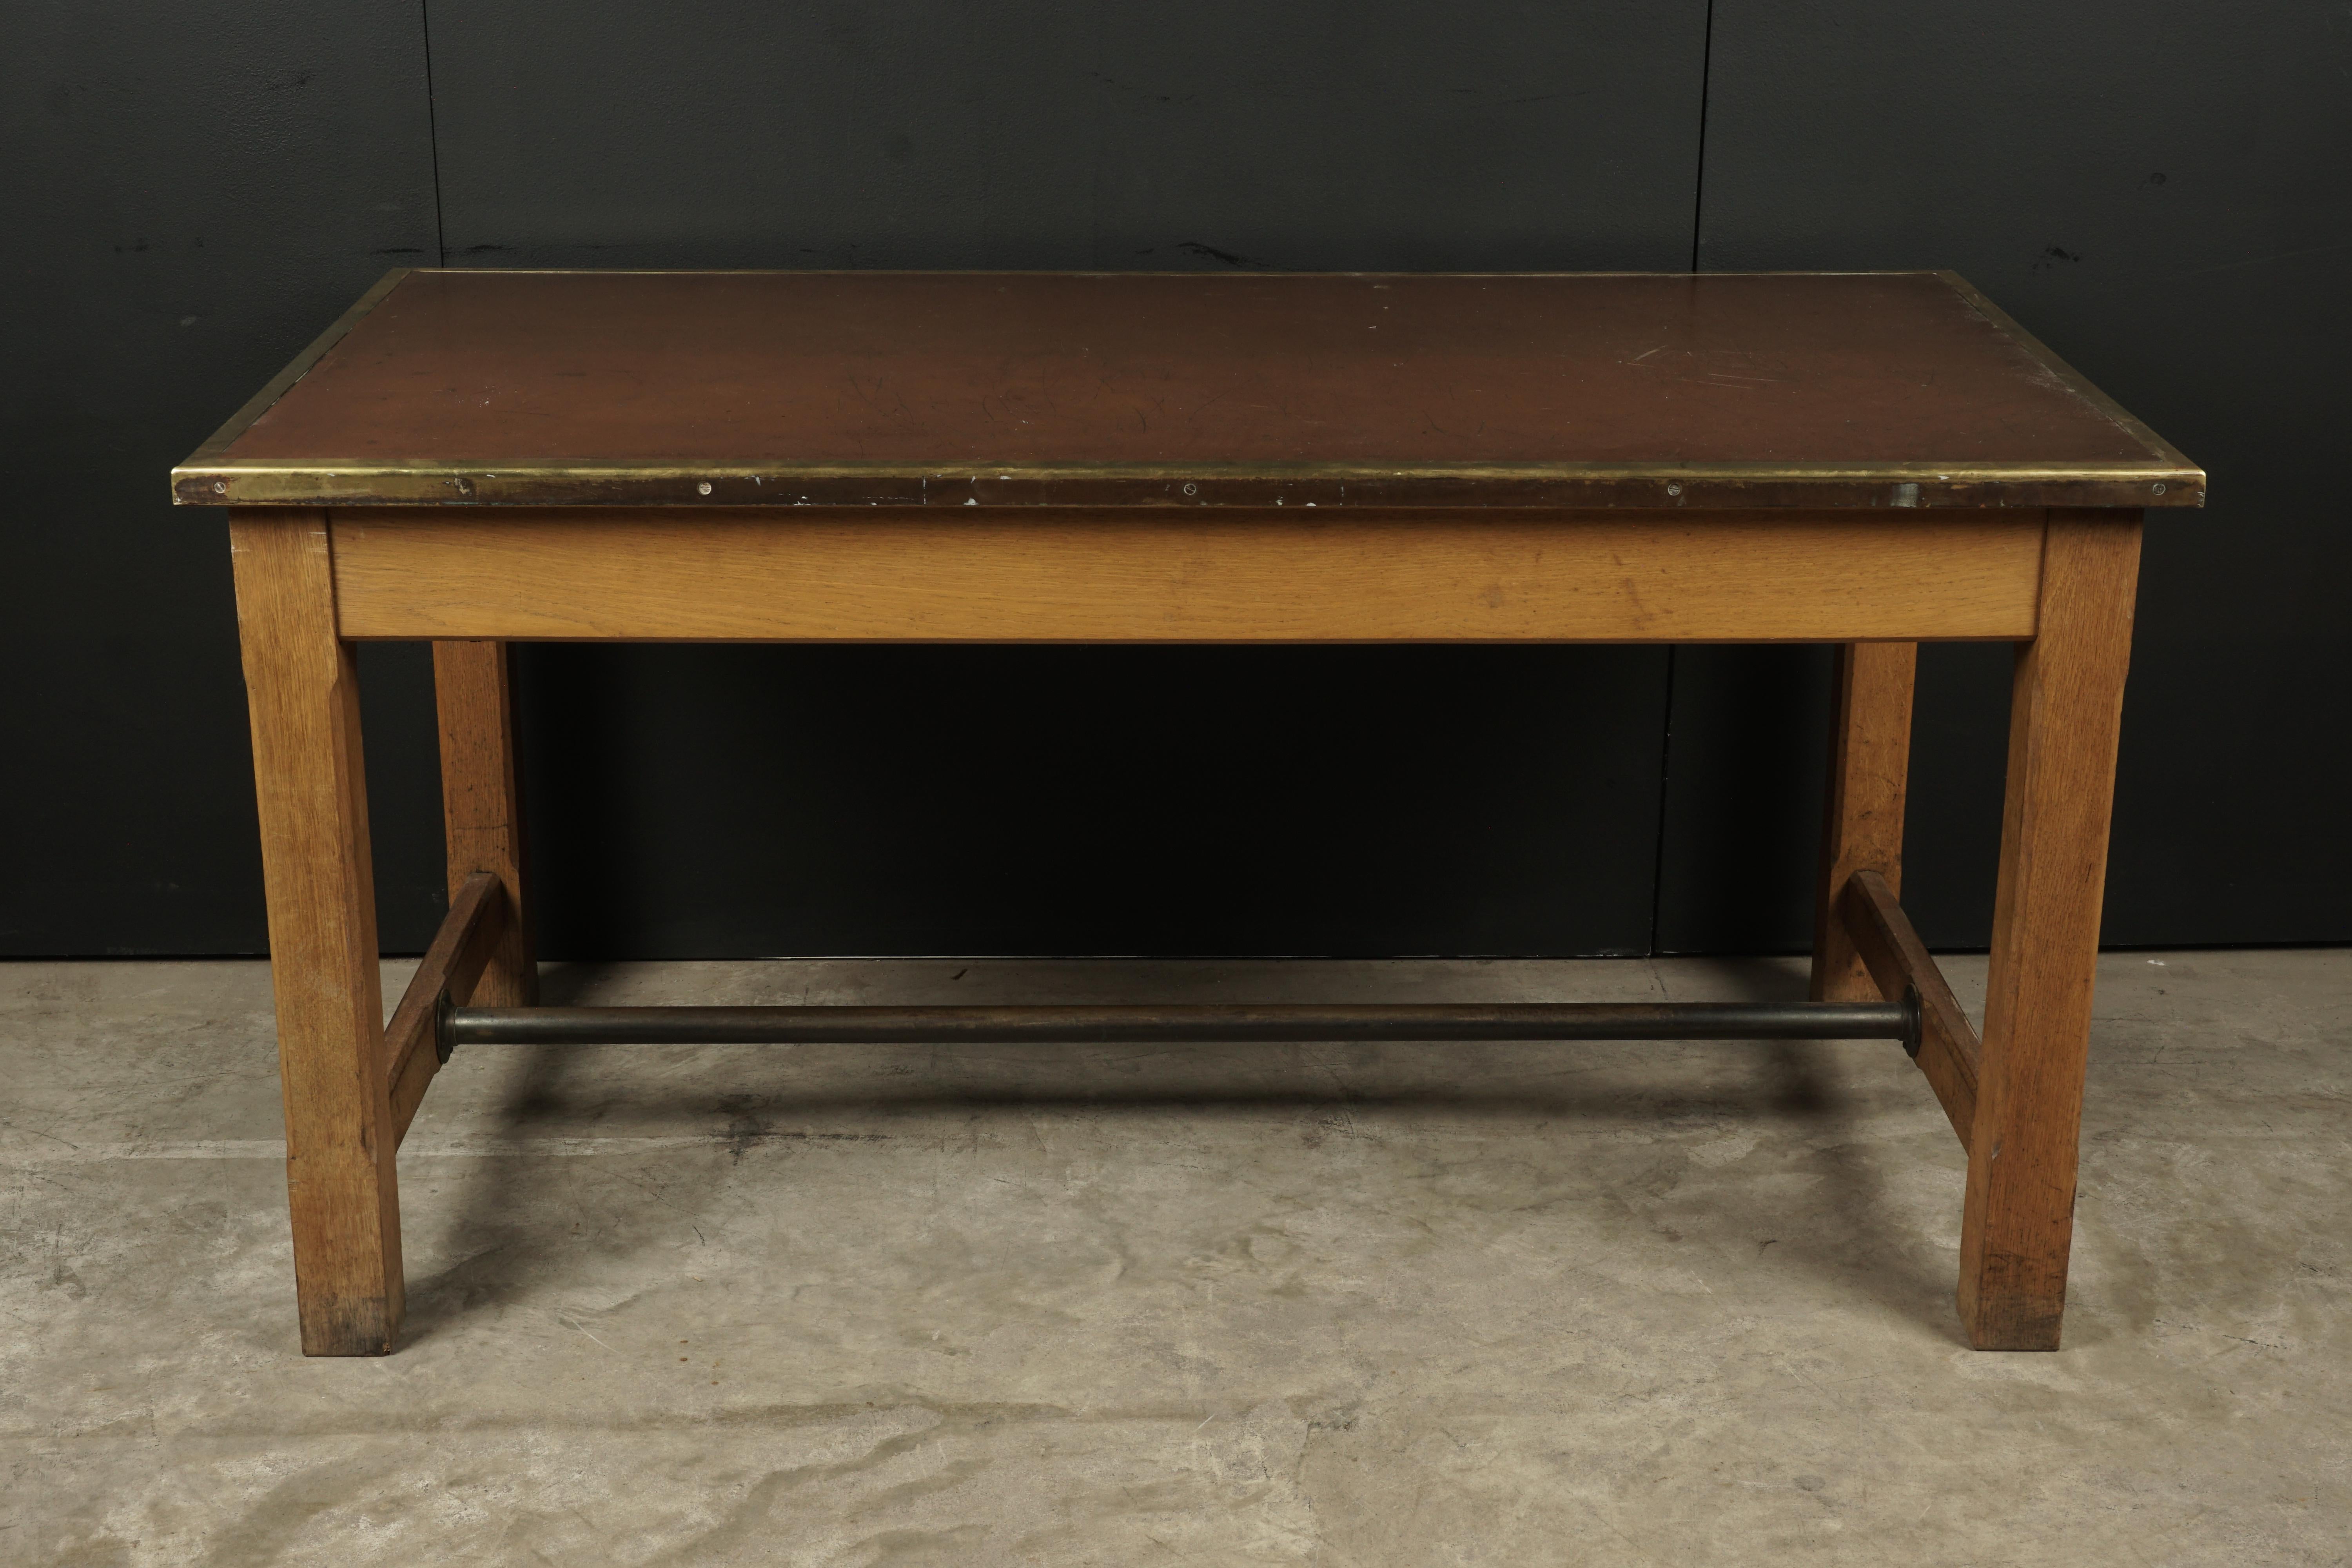 Rare Desk from the Banque De France, circa 1950. Solid oak construction with a thick sort of vinyl top and brass edge detail.